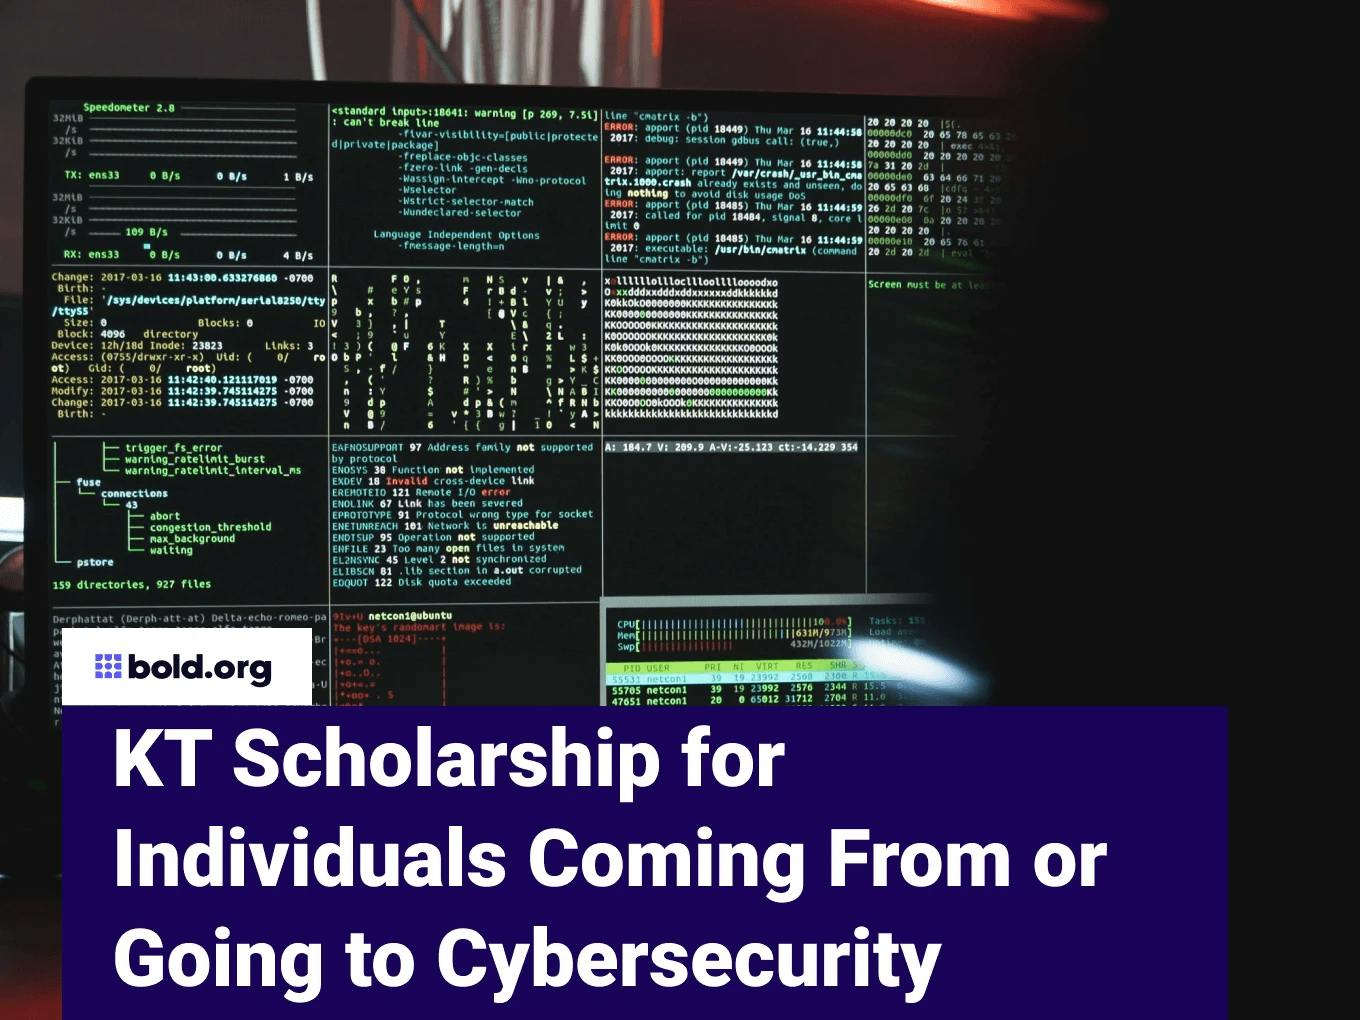 KT Scholarship for Individuals Coming From or Going to Cybersecurity